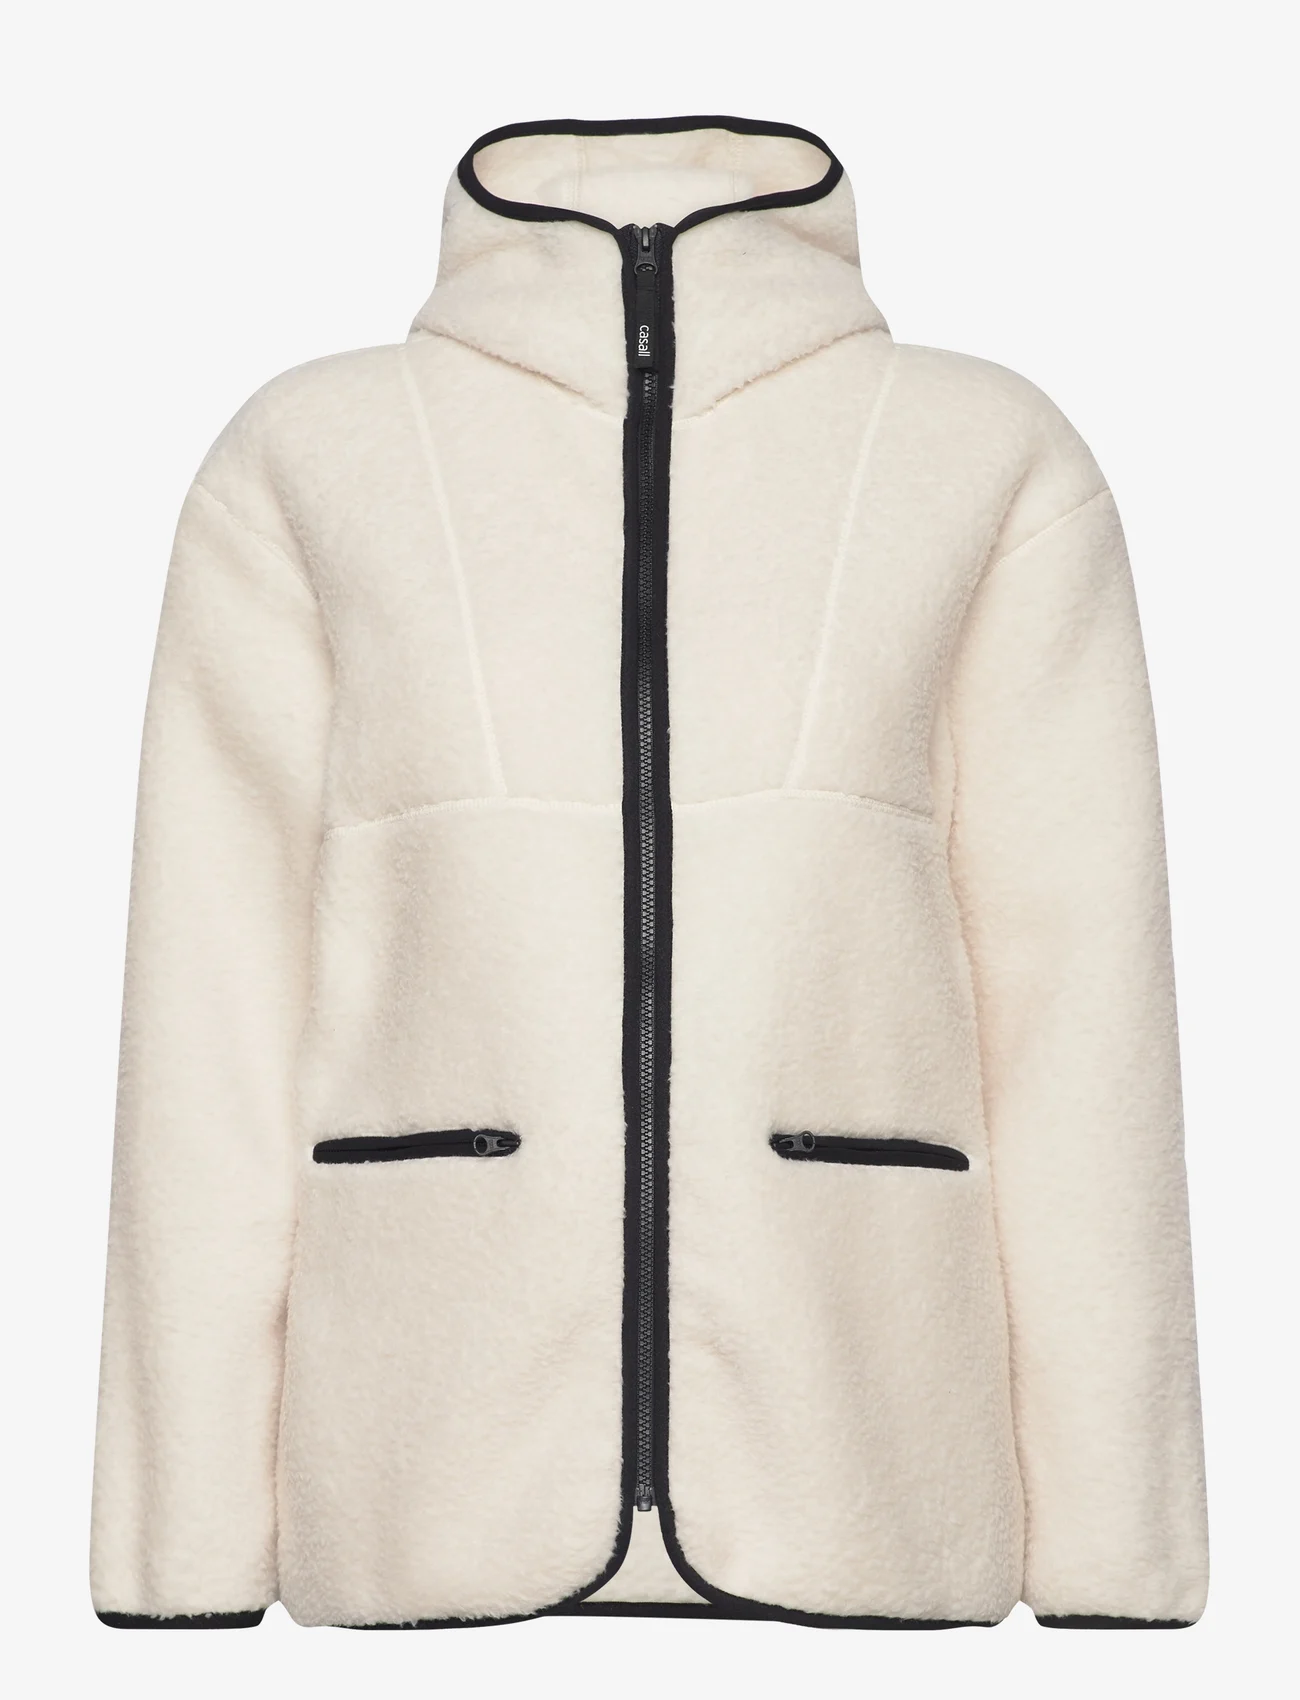 Casall - Pile Jacket - off white - 1